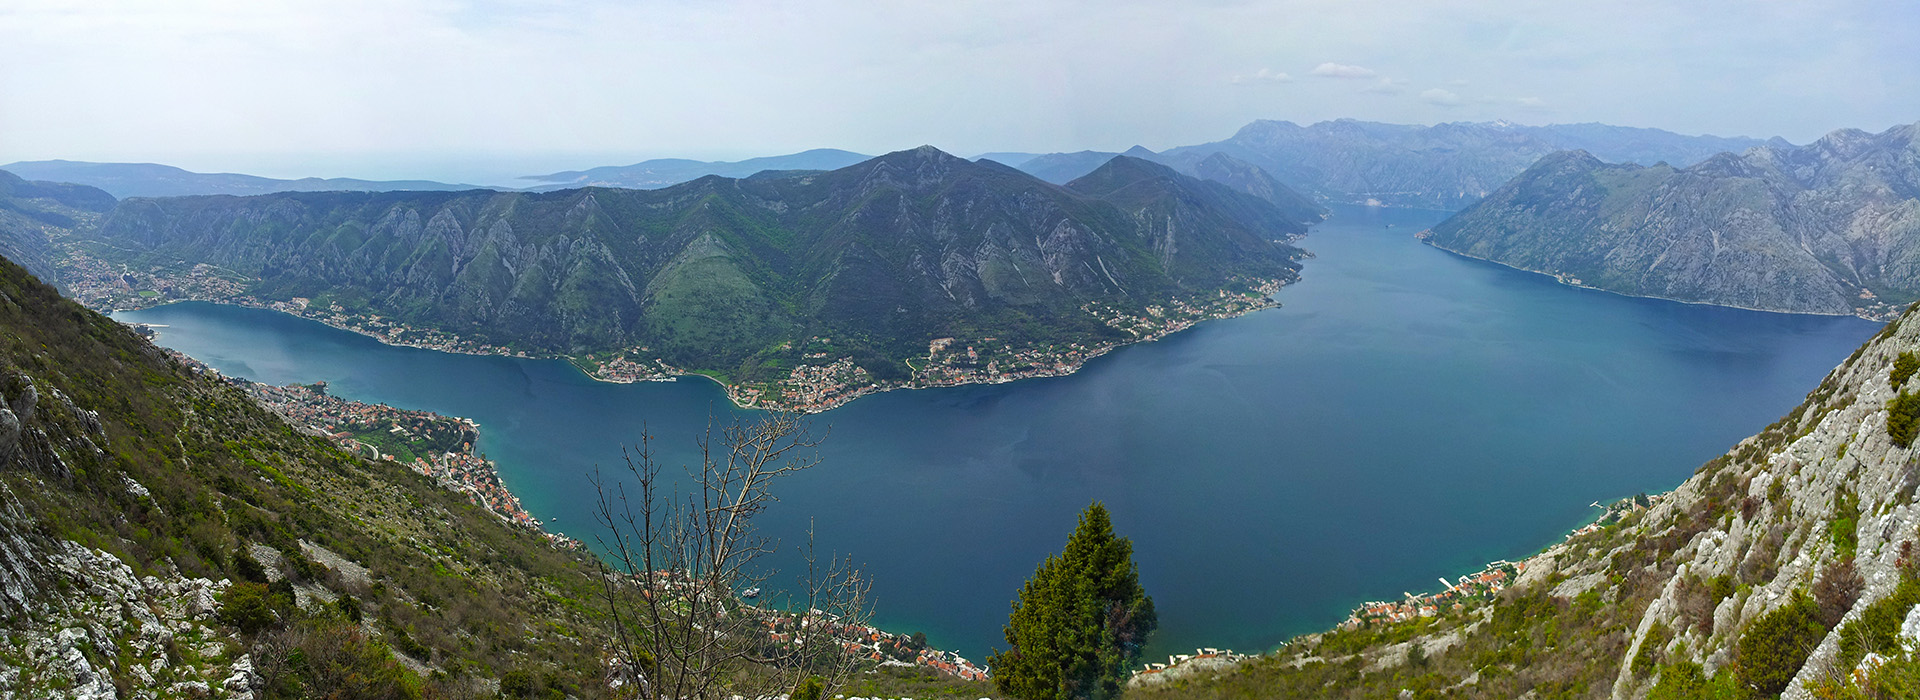 The Peaks of the Balkans walking guided holiday - Bay of Kotor